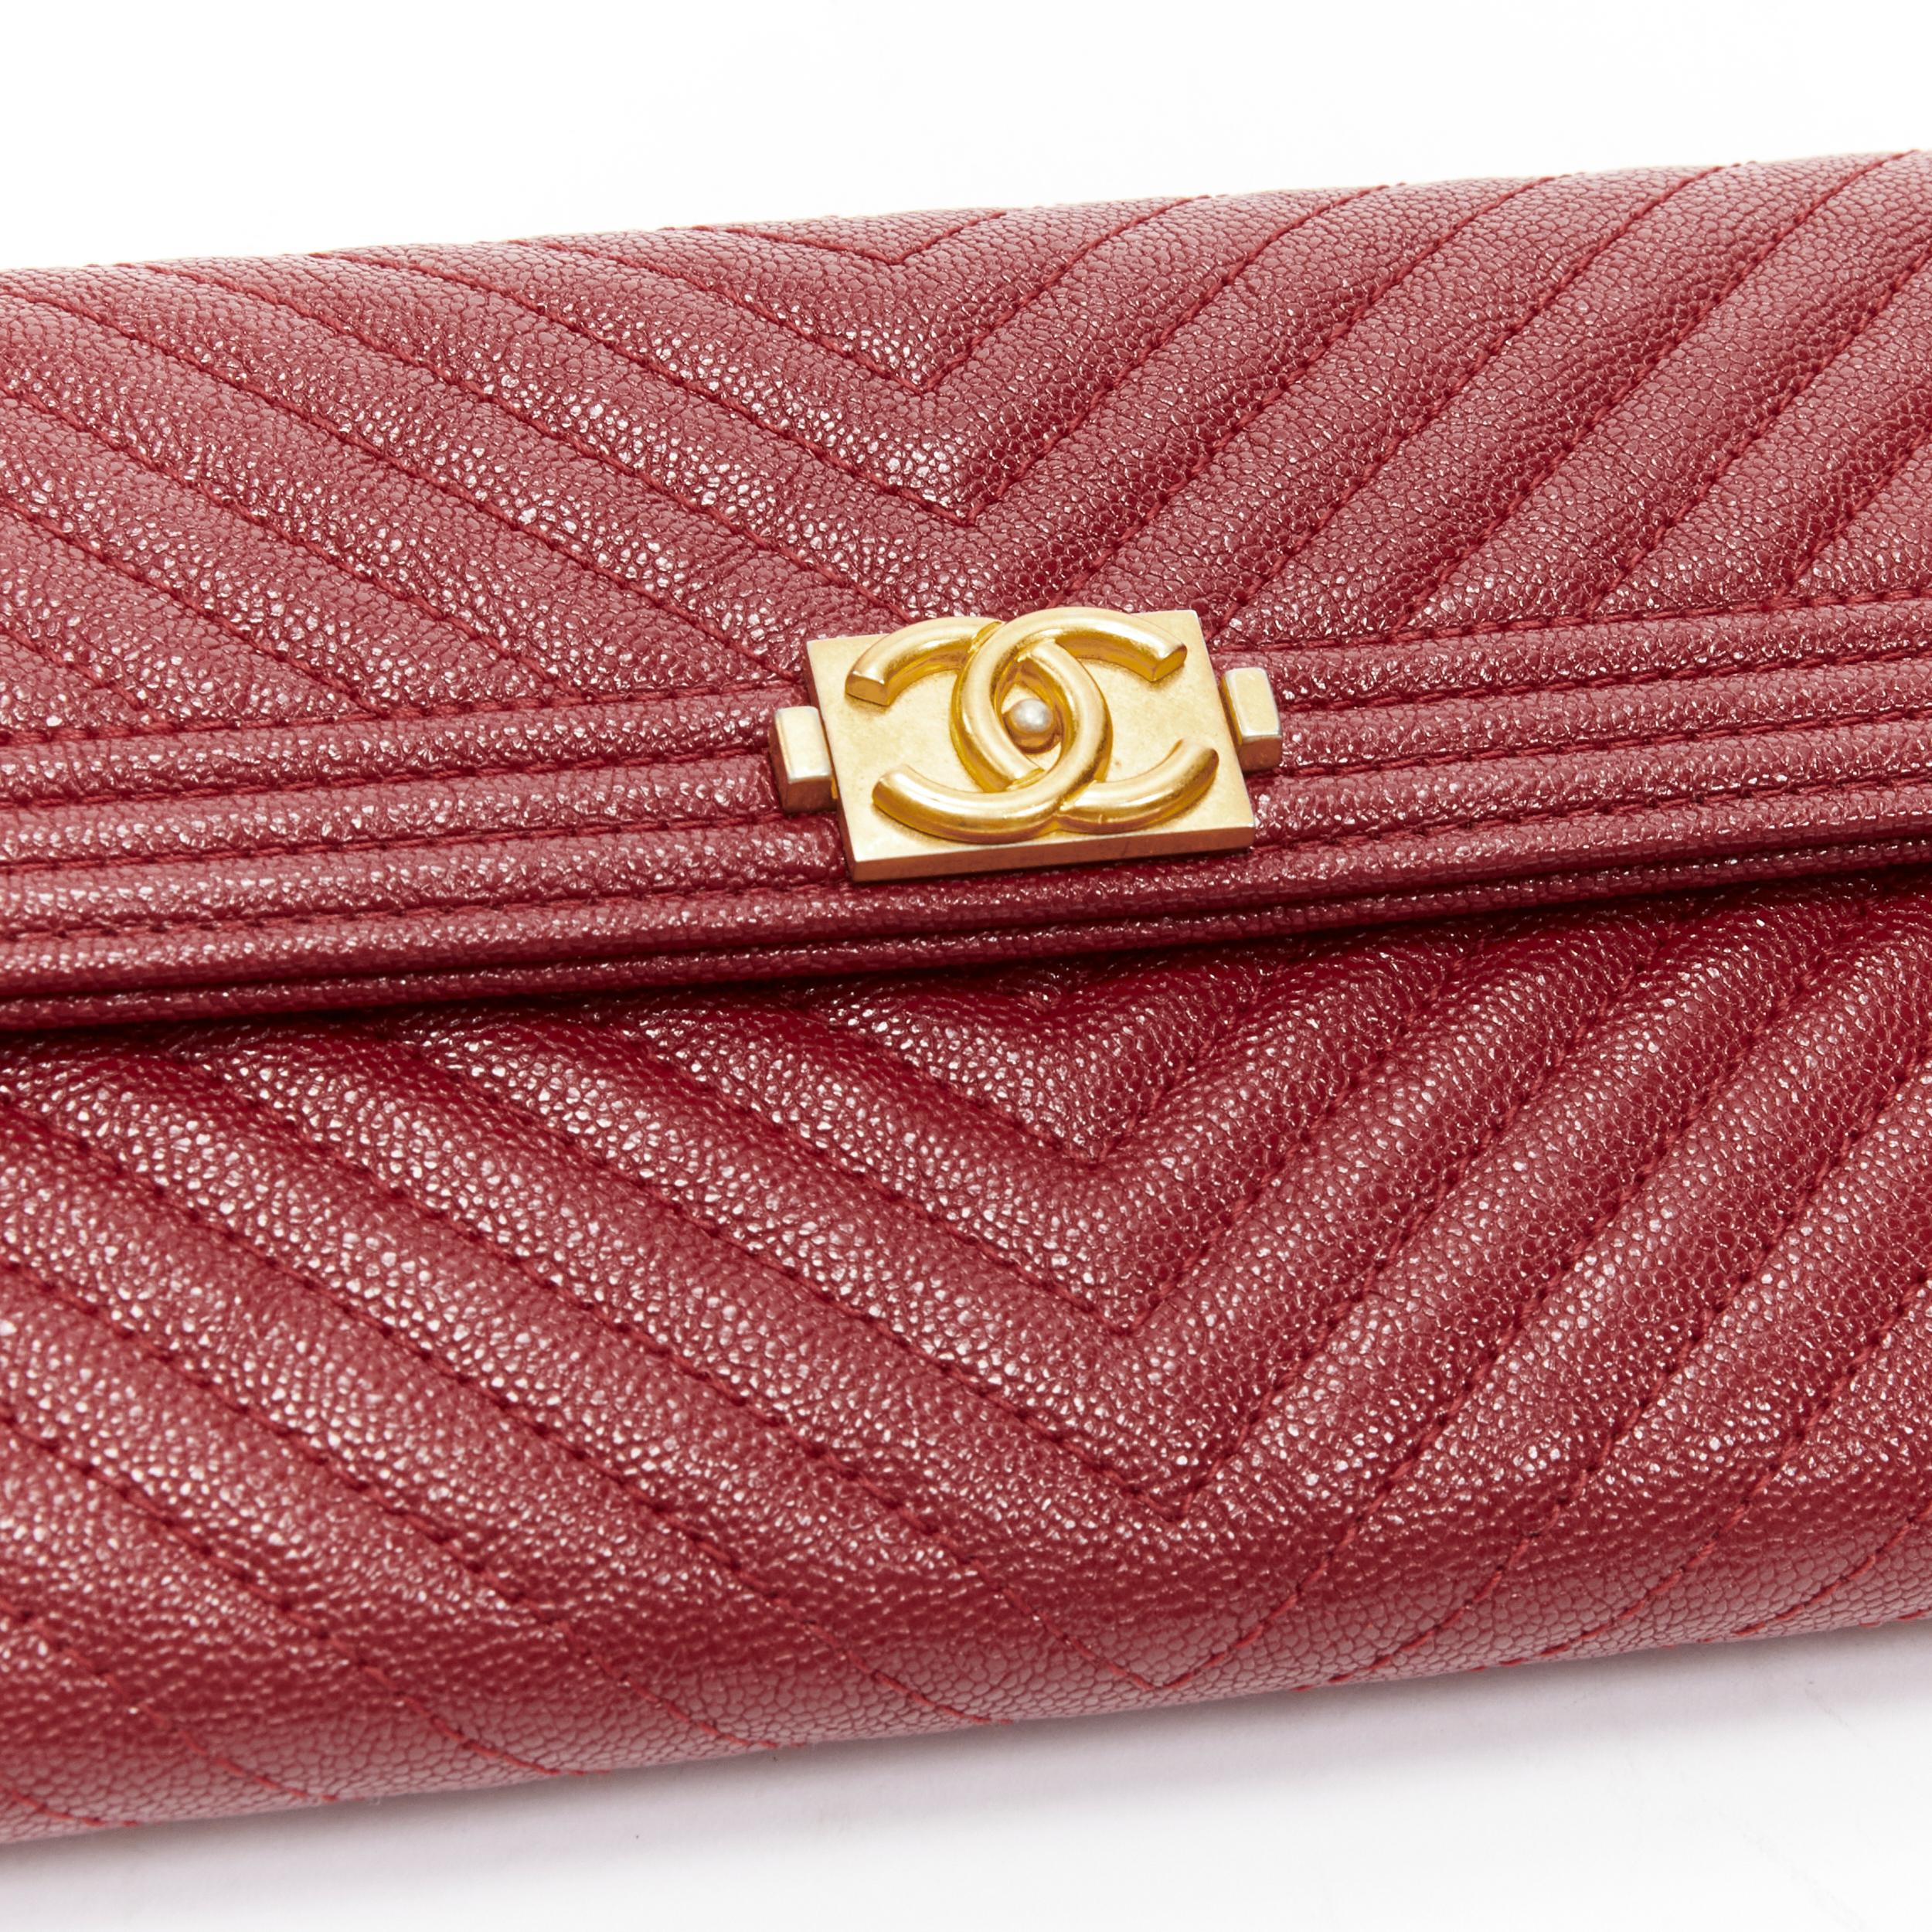 new CHANEL Boy chevron red caviar gold CC logo flap long wallet
Reference: LNKO/A02130
Brand: Chanel
Designer: Virginie Viard
Collection: Boy
Material: Leather
Color: Red
Pattern: Solid
Closure: Snap Buttons
Lining: Red Fabric
Made in: